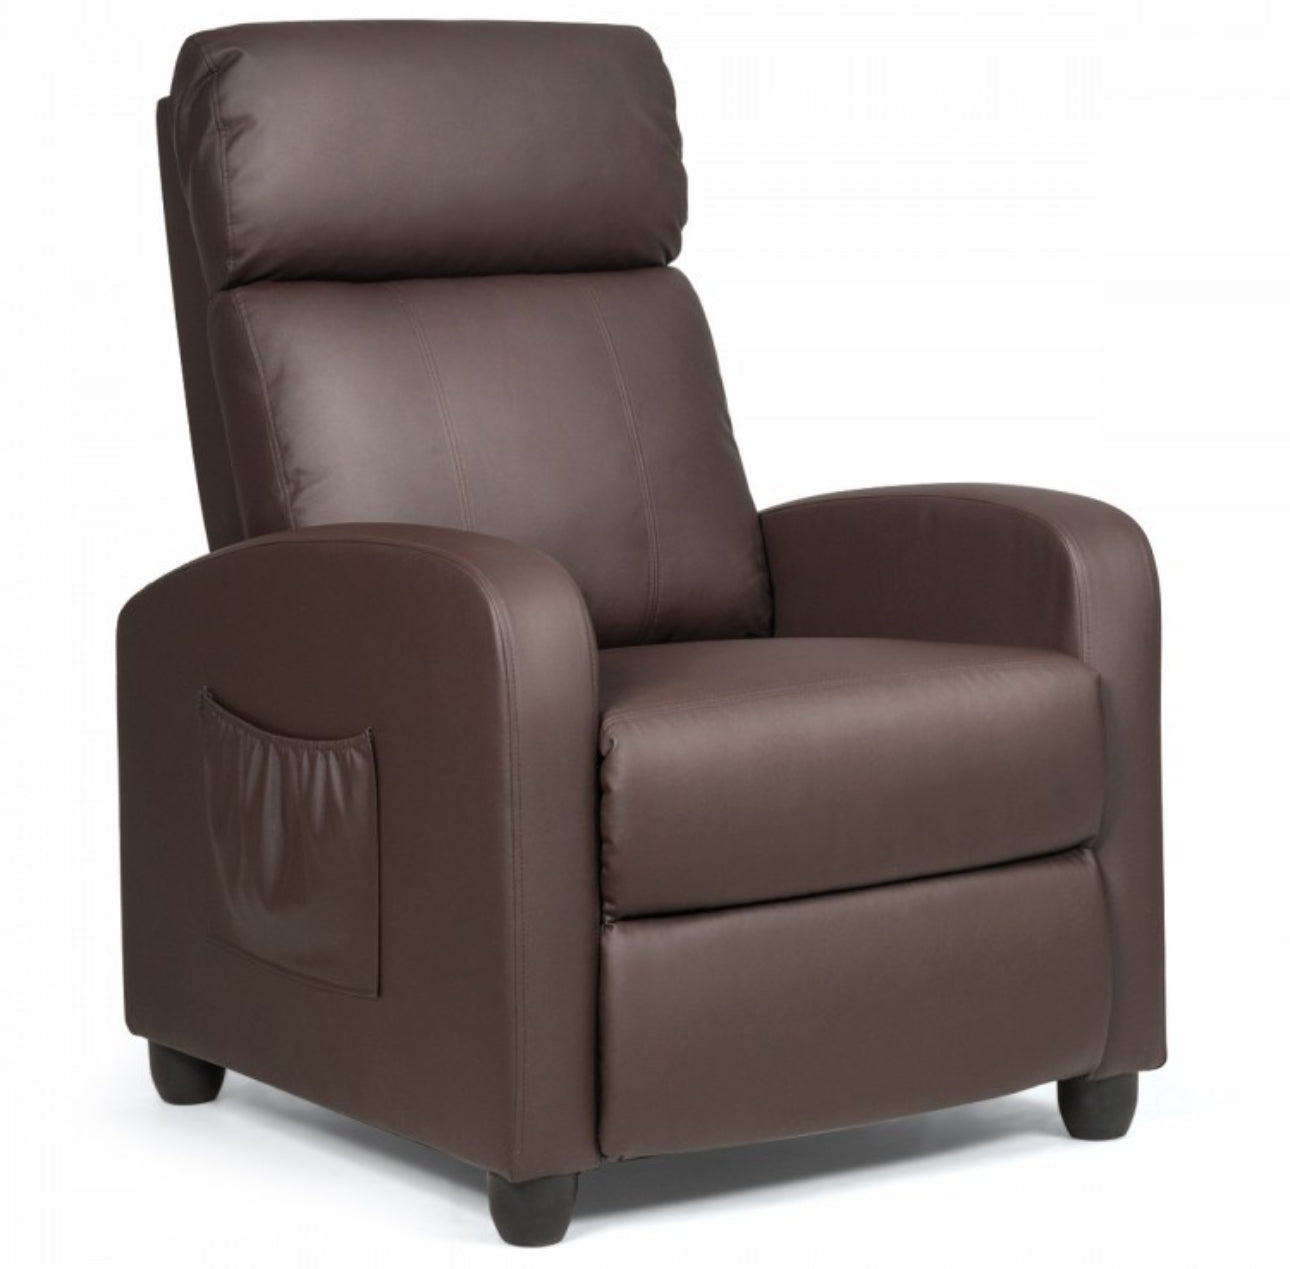 Heavy Duty Comfortable Massage Recliner Chair Wingback Single Chair With Side Pocket, Remote | 8 Massage Modes